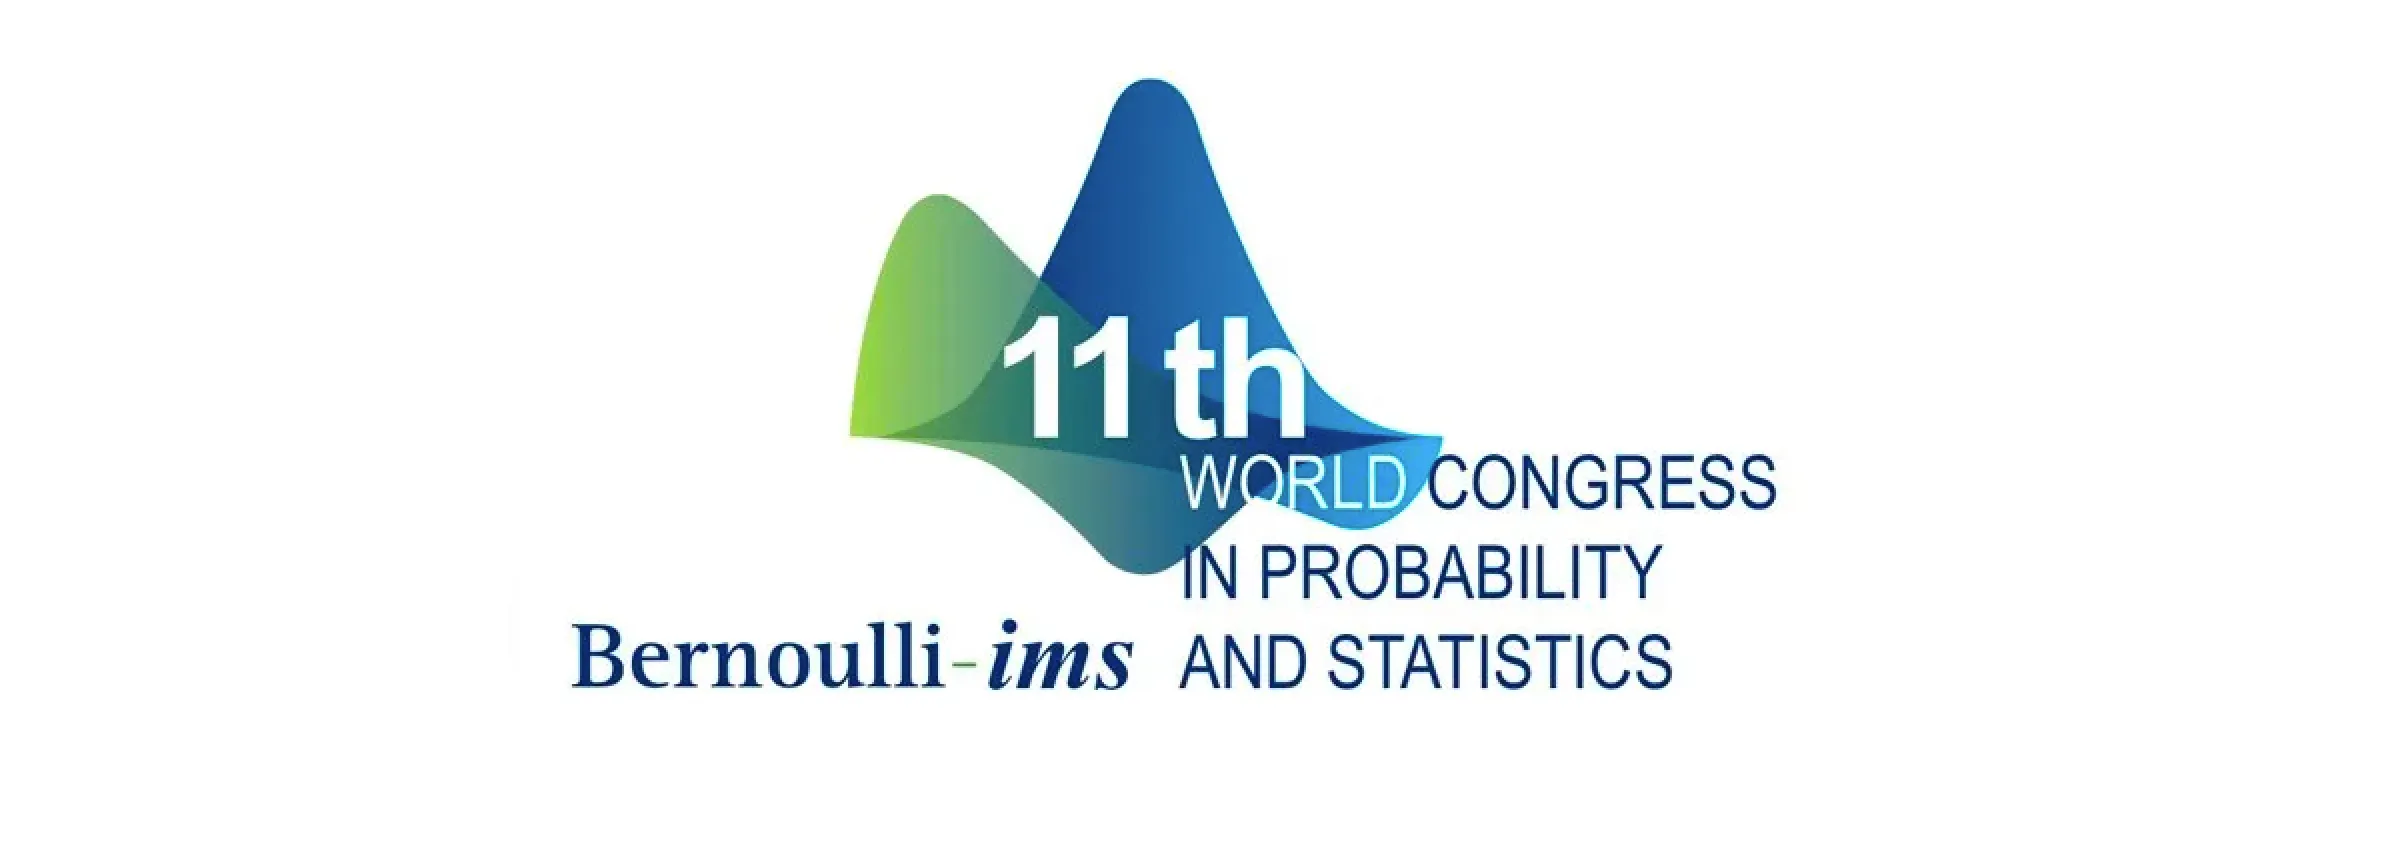 Bernoulli-IMS 11th World Congress in Probability and Statistics